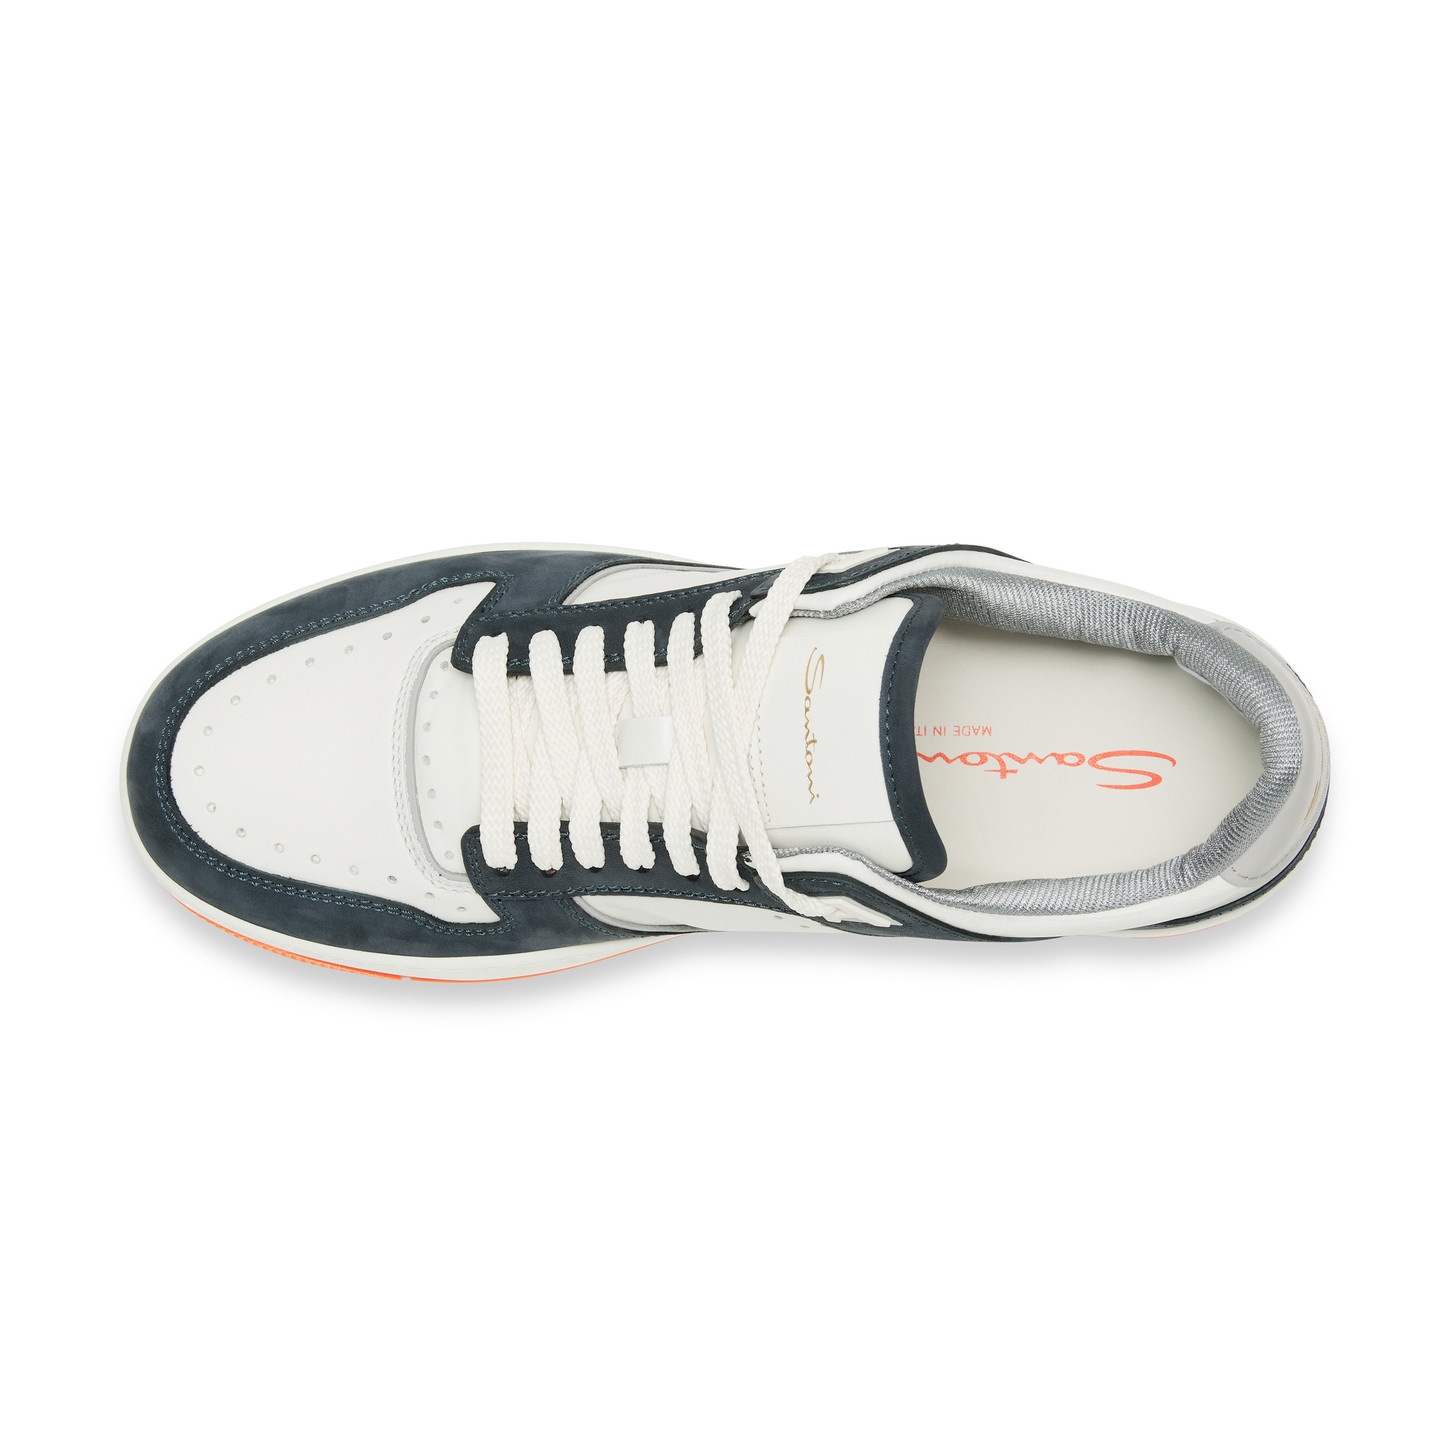 Men’s white and blue leather and nubuck Sneak-Air sneaker - 5